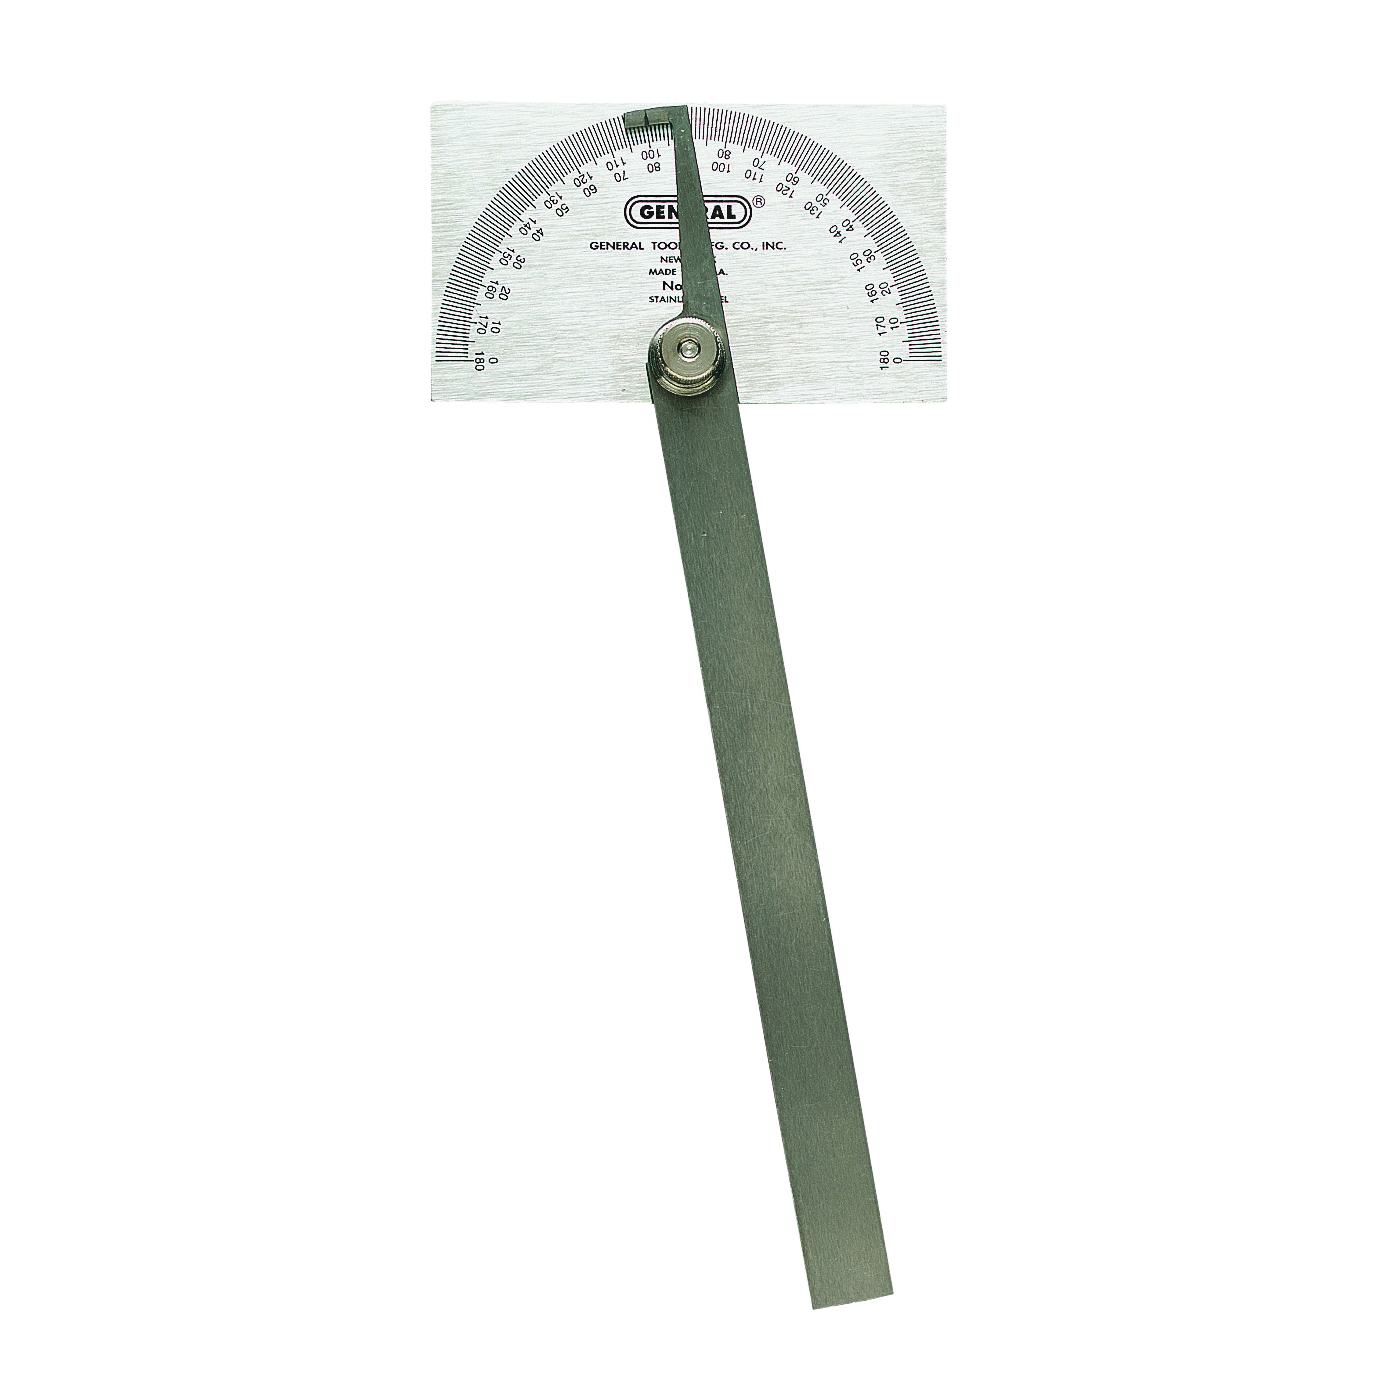 GENERAL 17 Square Head Protractor, 0 to 180 deg, Stainless Steel, Silver - 1